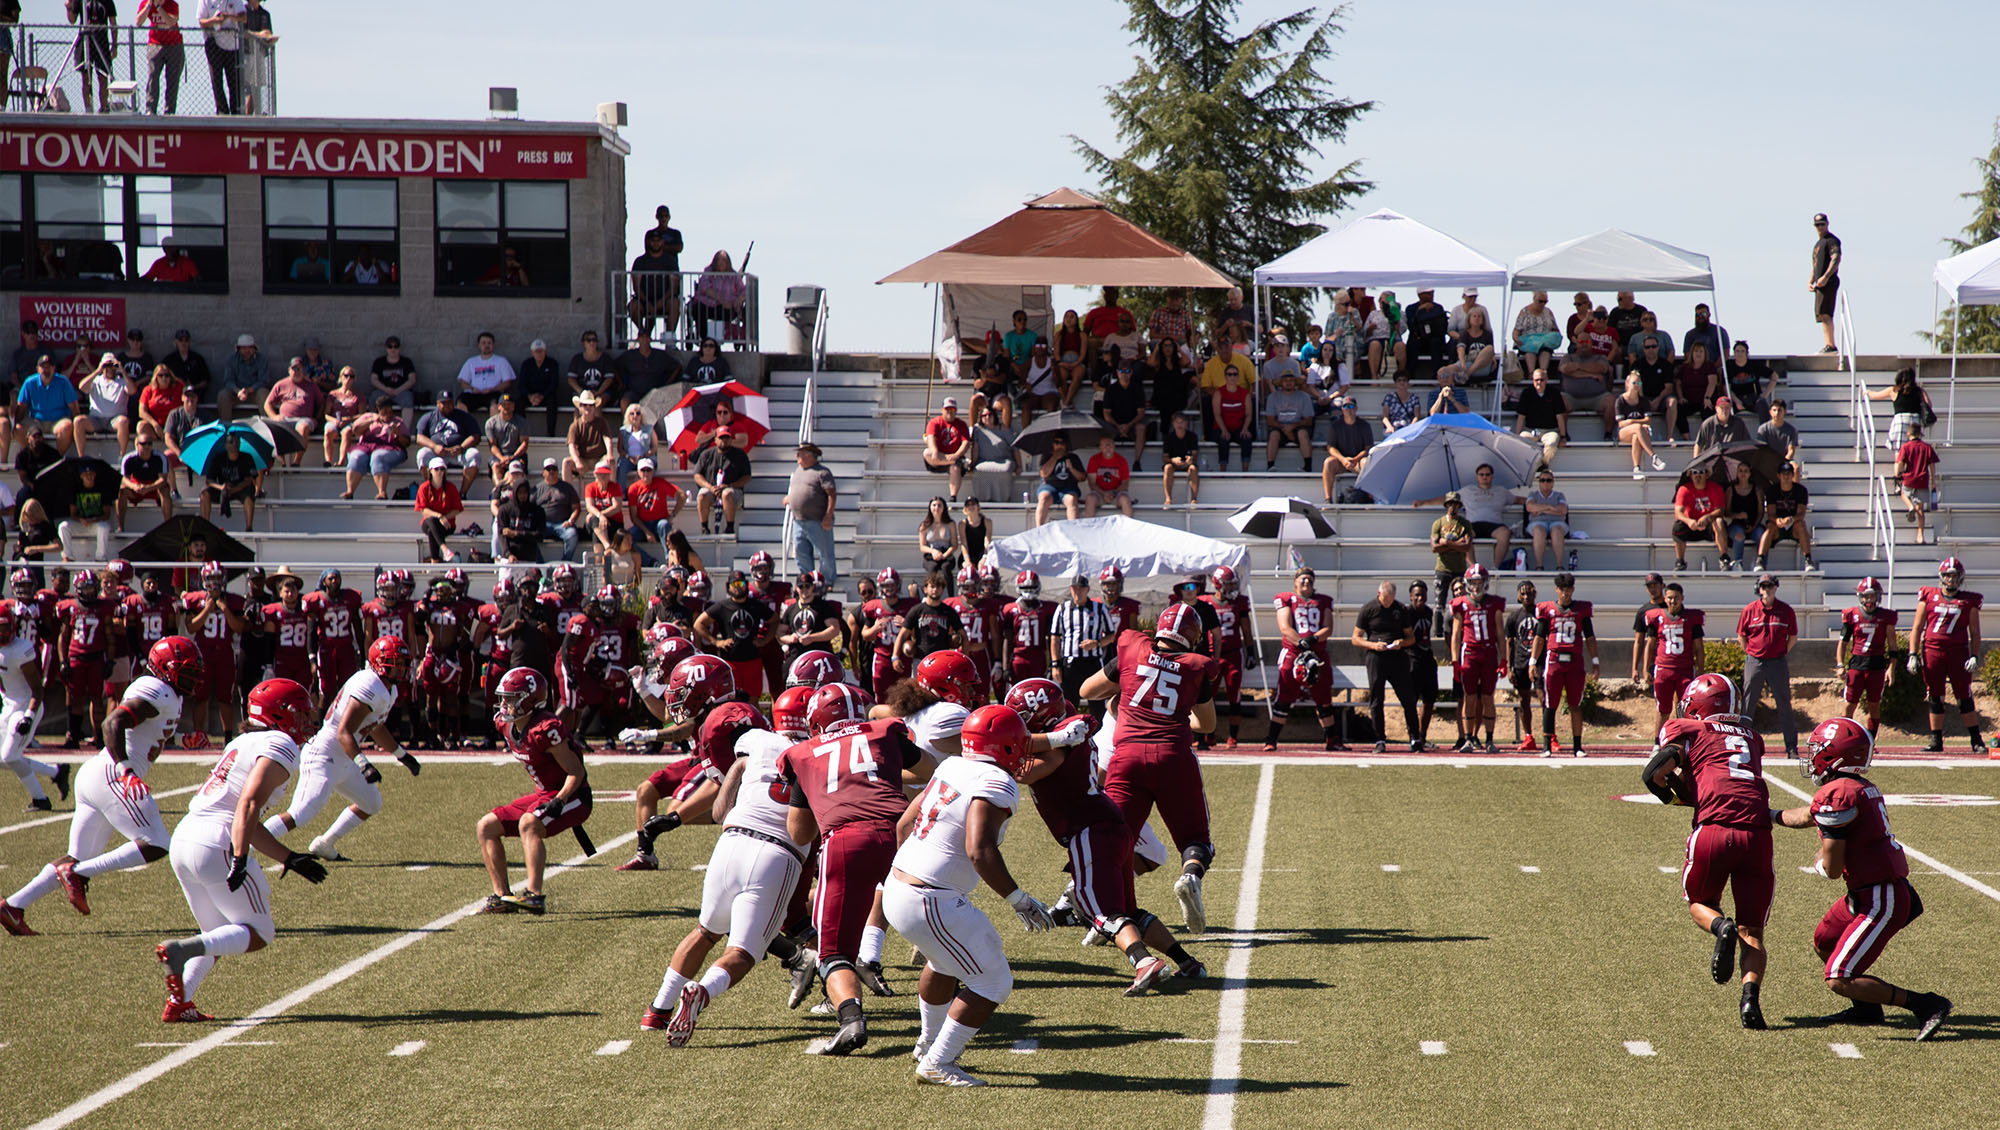 Sierra College football team playing on the field during Preview Day